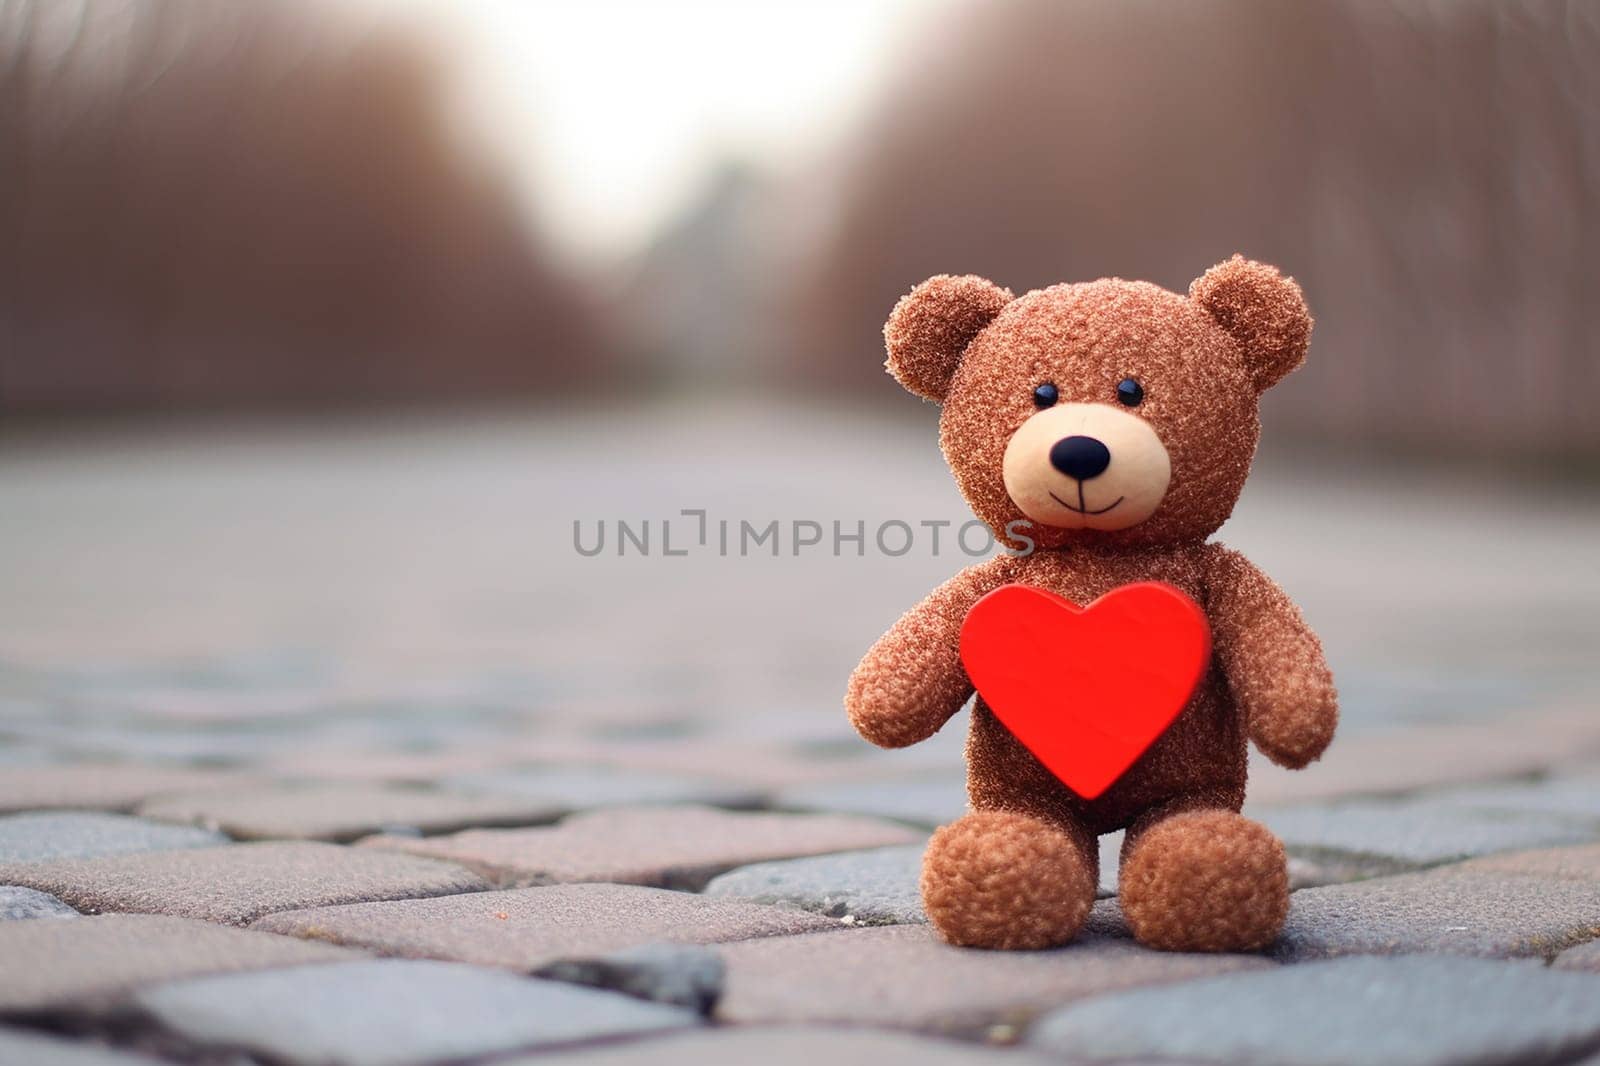 A brown teddy bear with a red heart on a cobblestone surface.